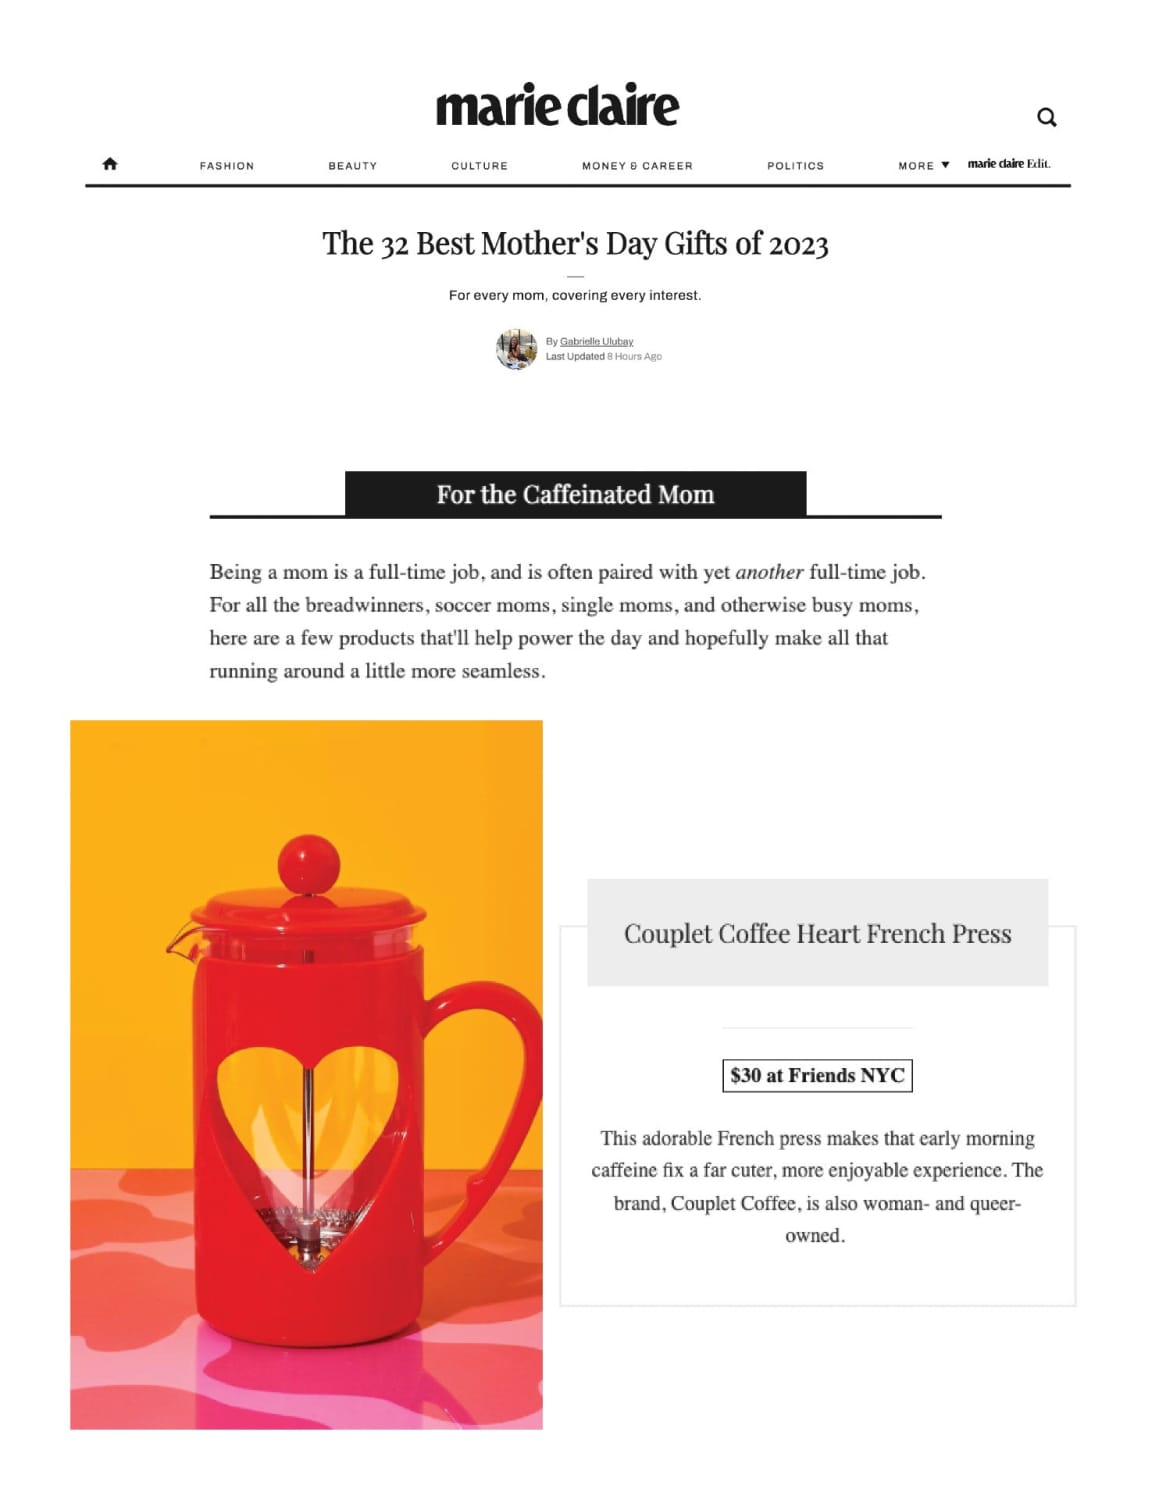 mother's day gift guide heart french press at friends nyc